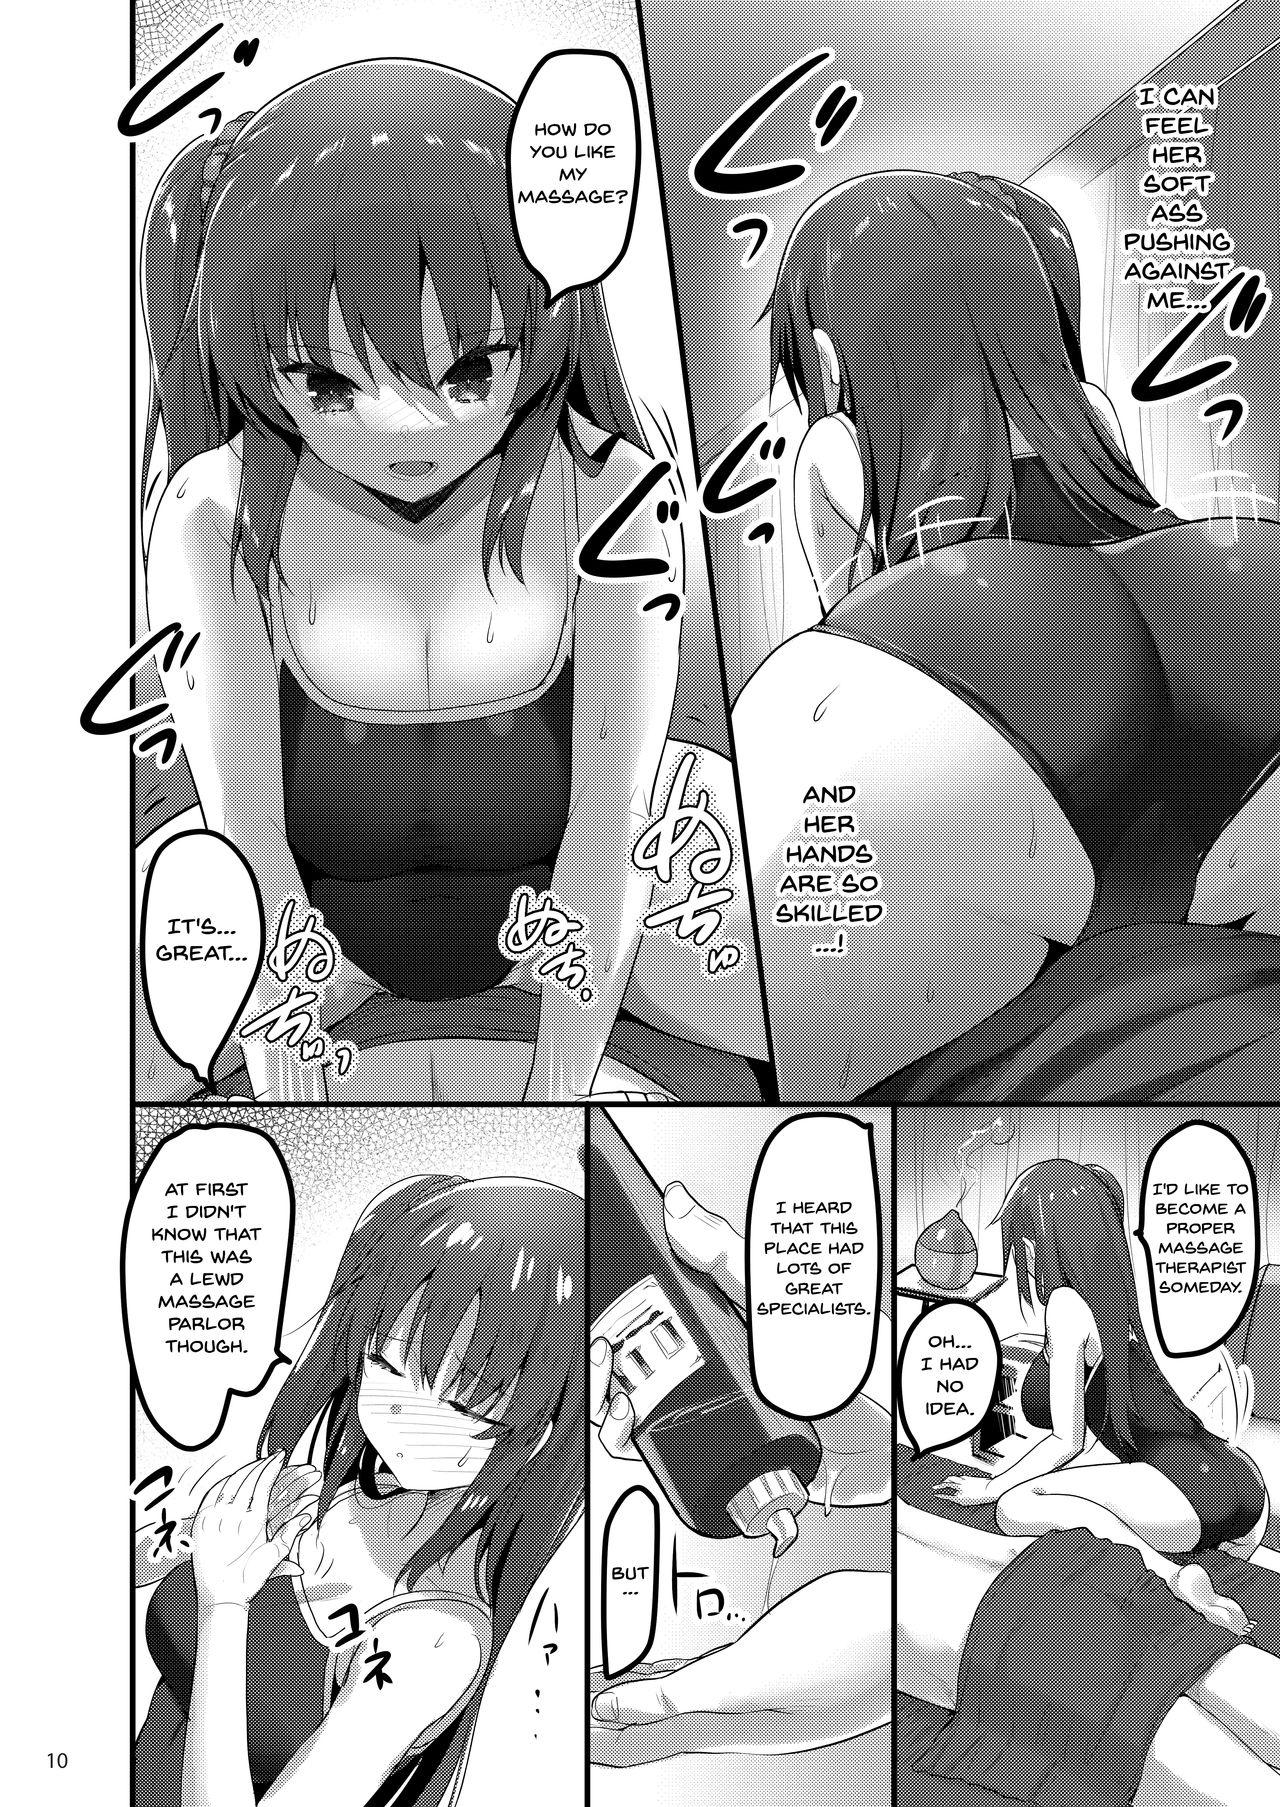 Gay Friend Ecchi na Massage-ya ni Kitara Classmate ga Dete Kita Hanashi | A Story Of Going Out To Get a Massage And The One Who Shows Up Is My Classmate - Original India - Page 9